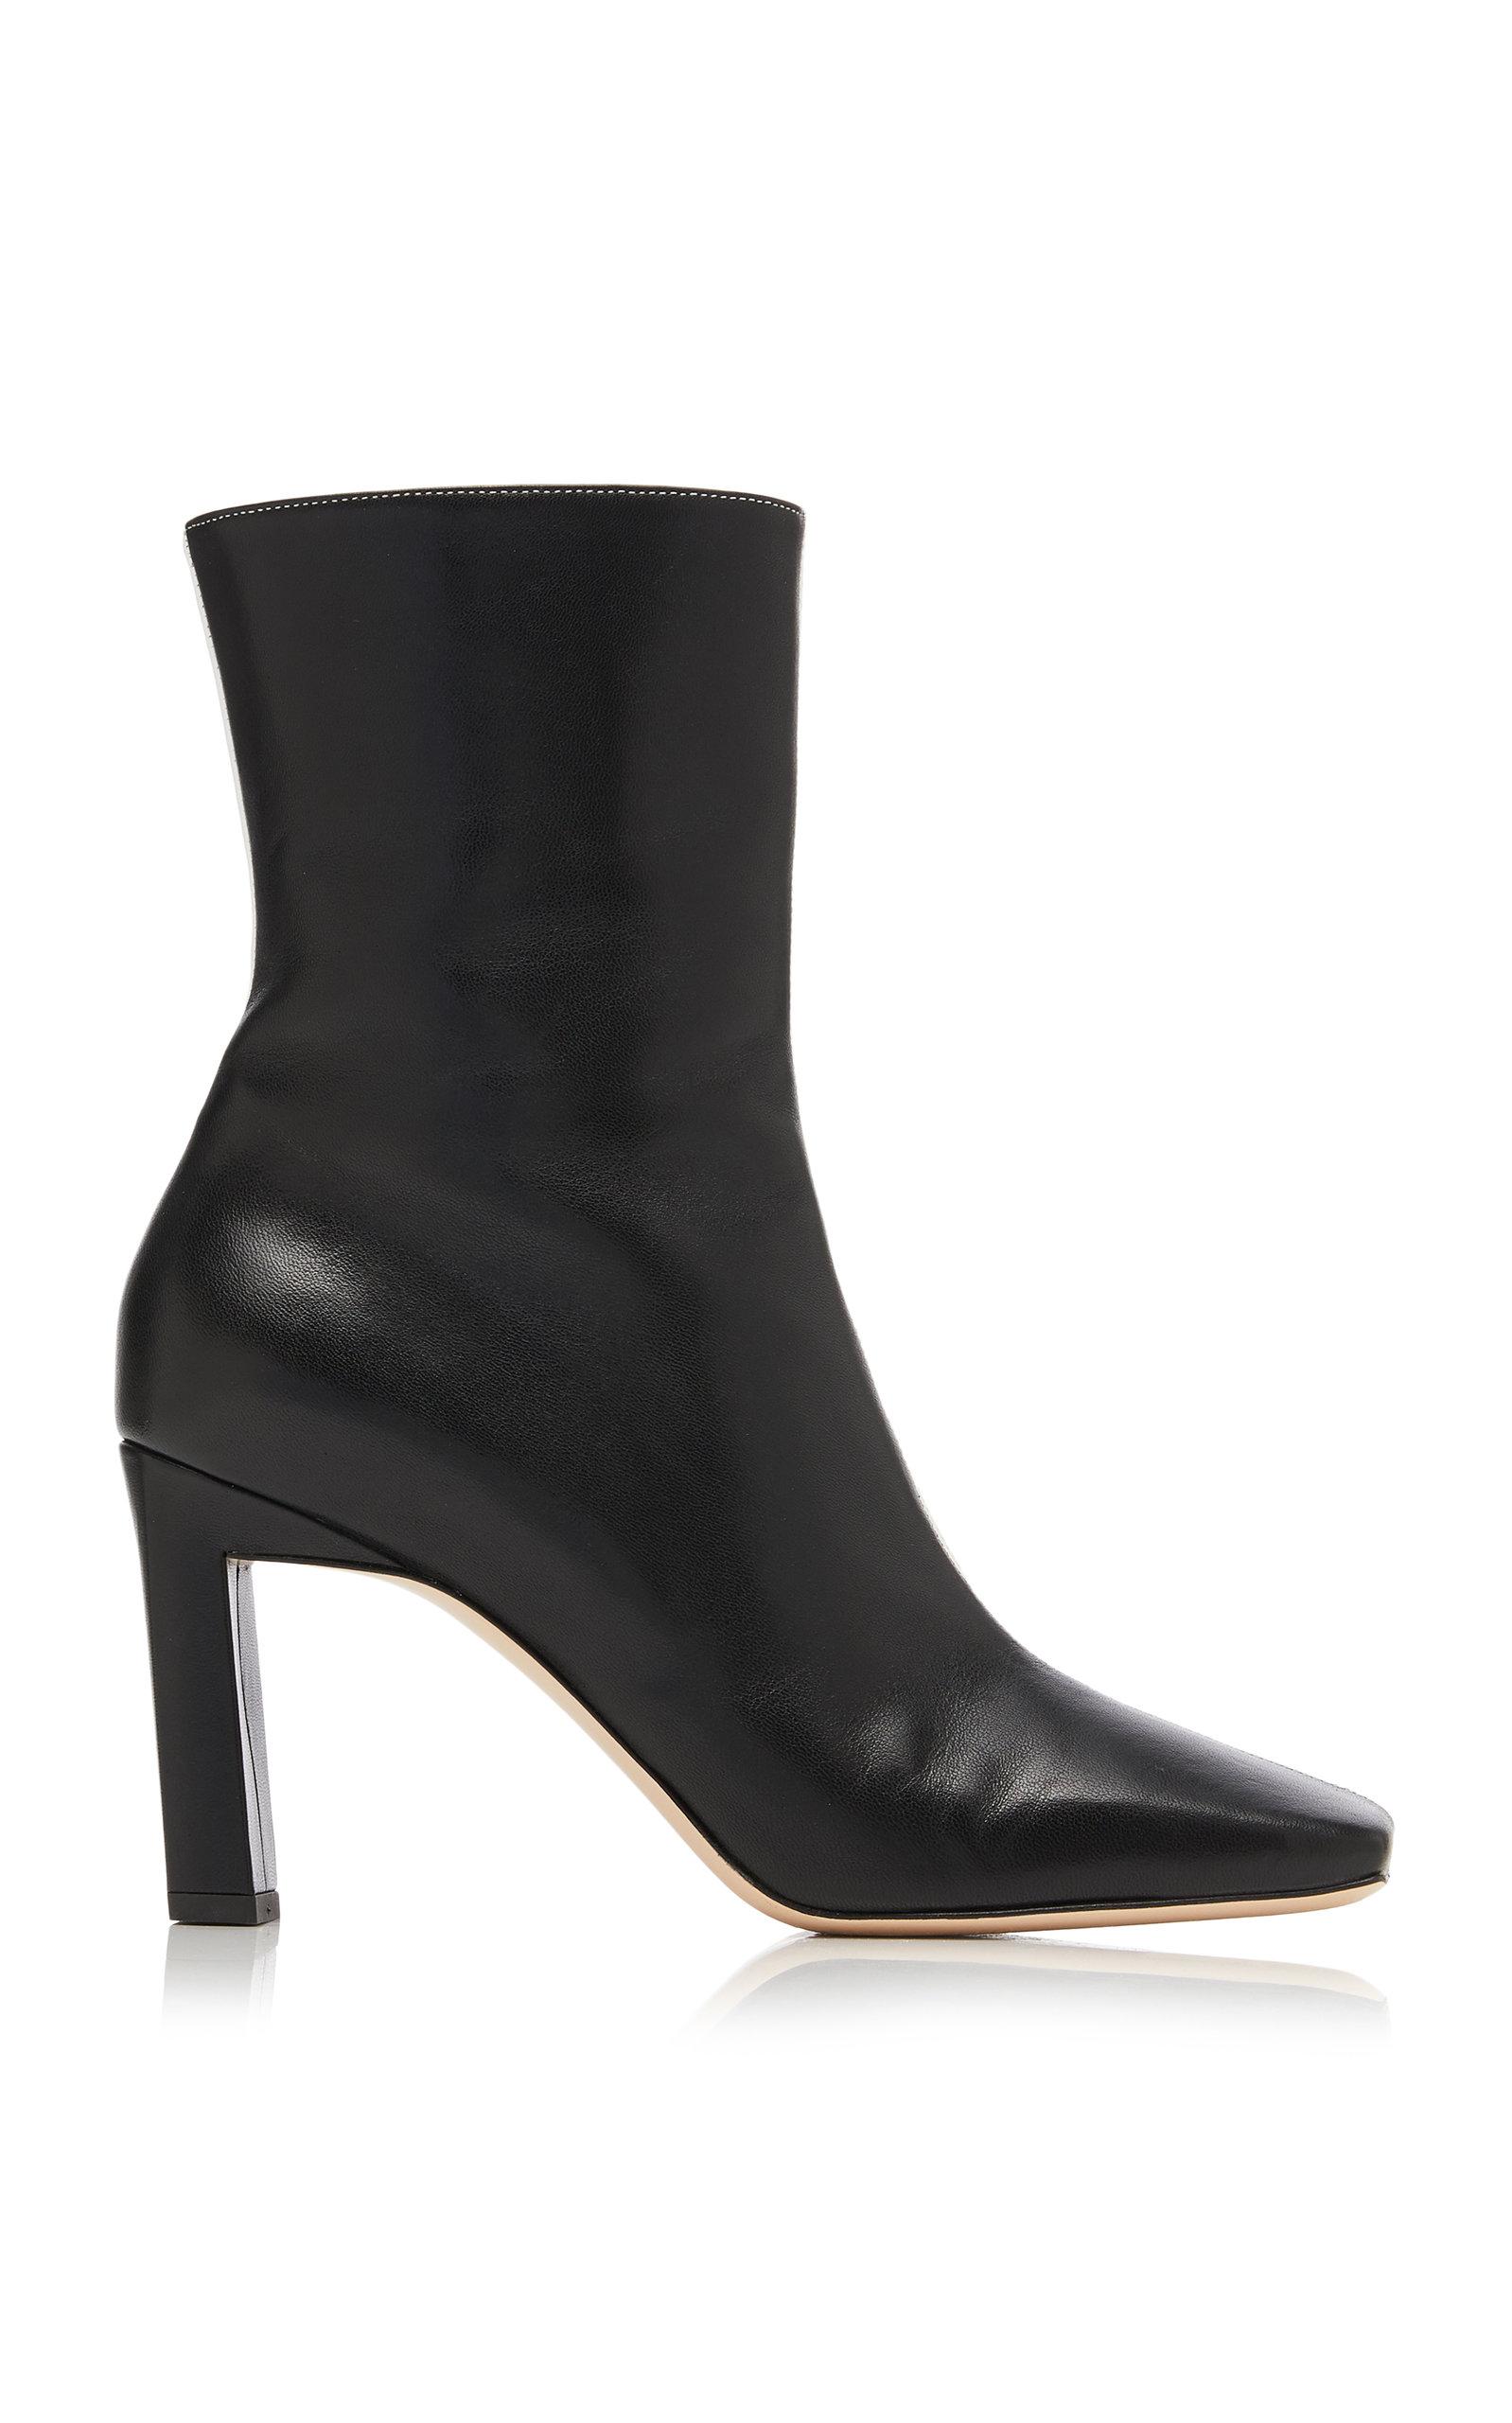 Wandler Isa Two-tone Leather Ankle Boots in Black/White (Black) - Lyst